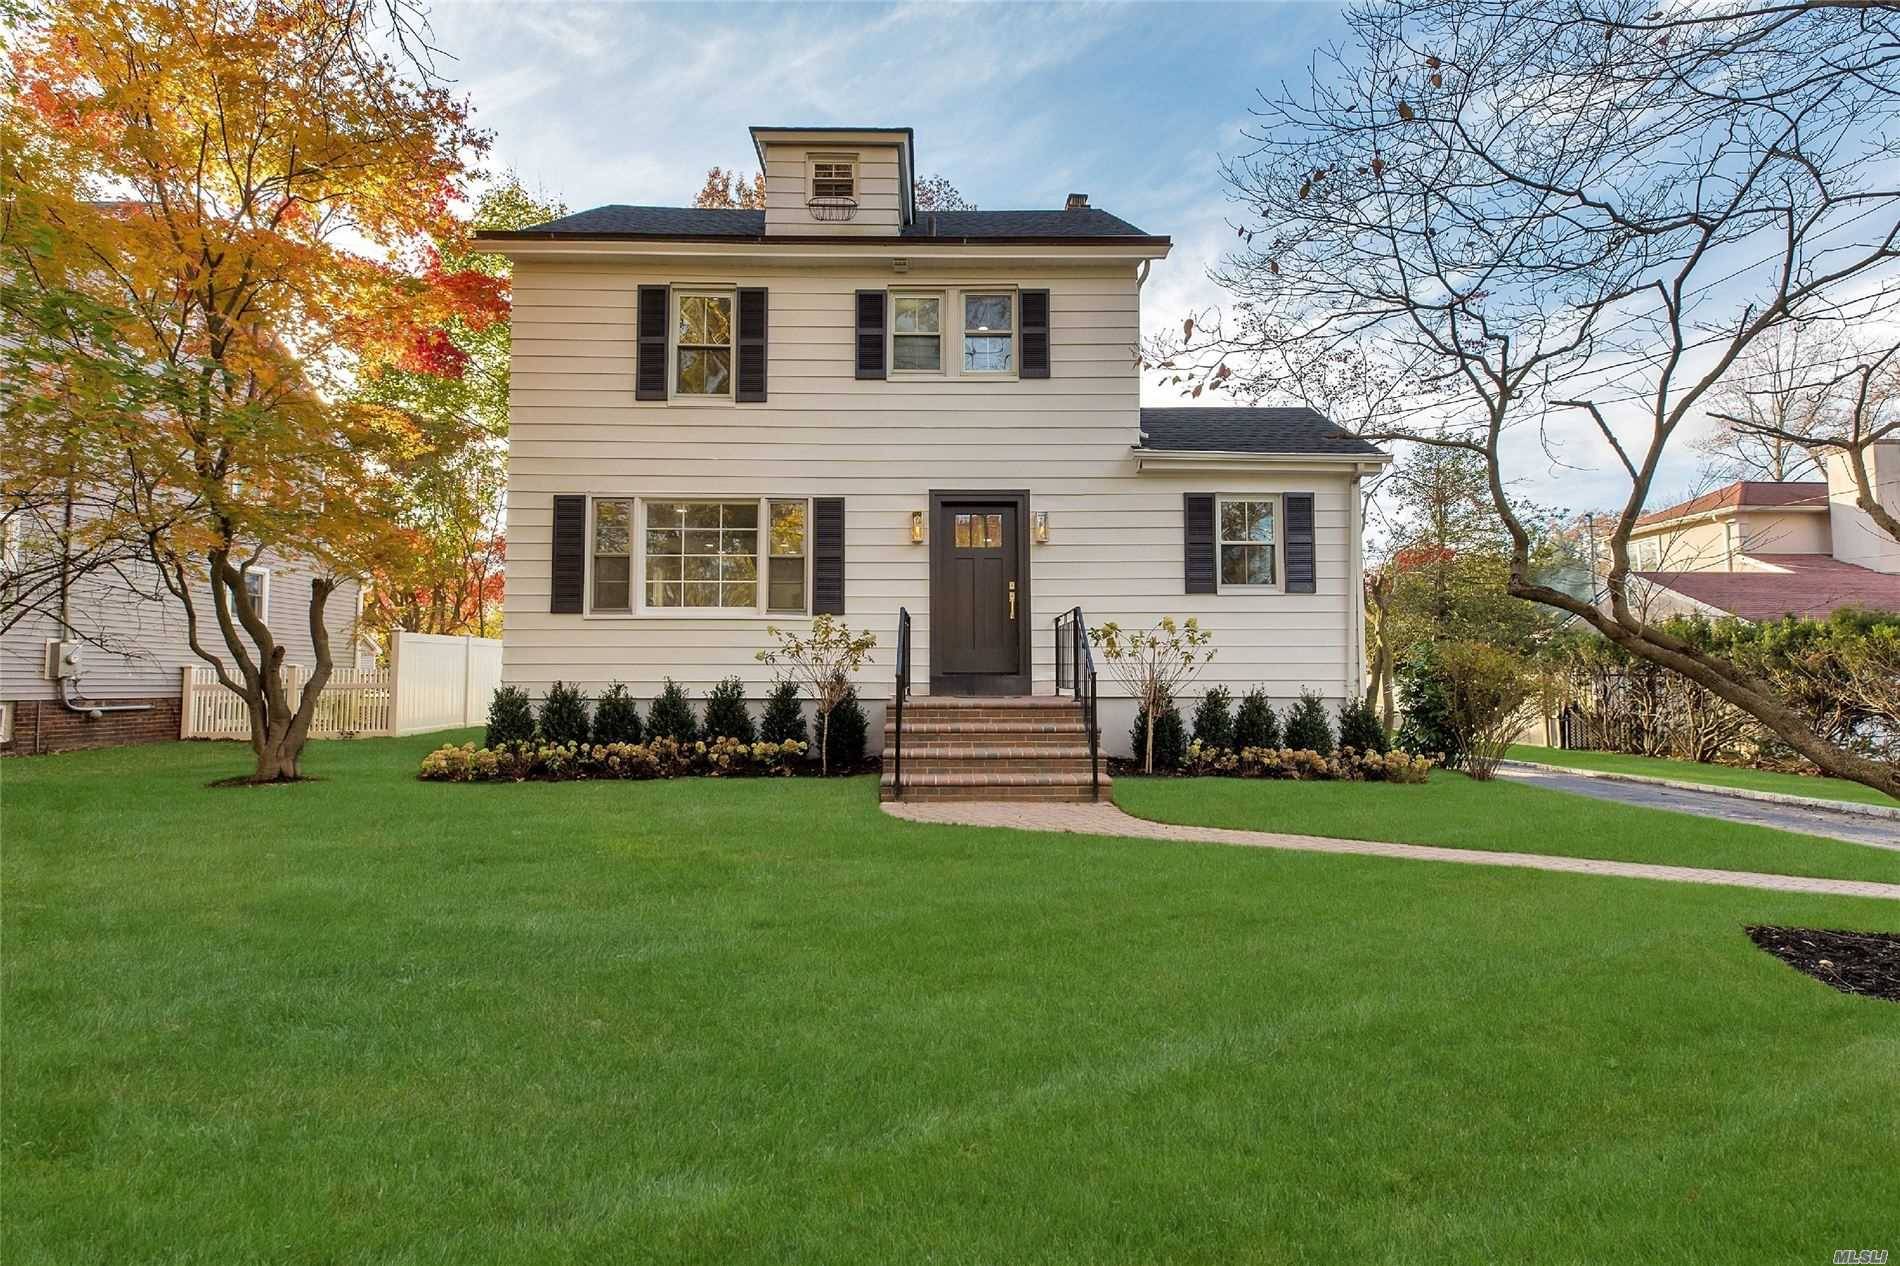 This Classic Colonial Has Been Newly Renovated And Modernized From Top To Bottom, Both Inside And Out.